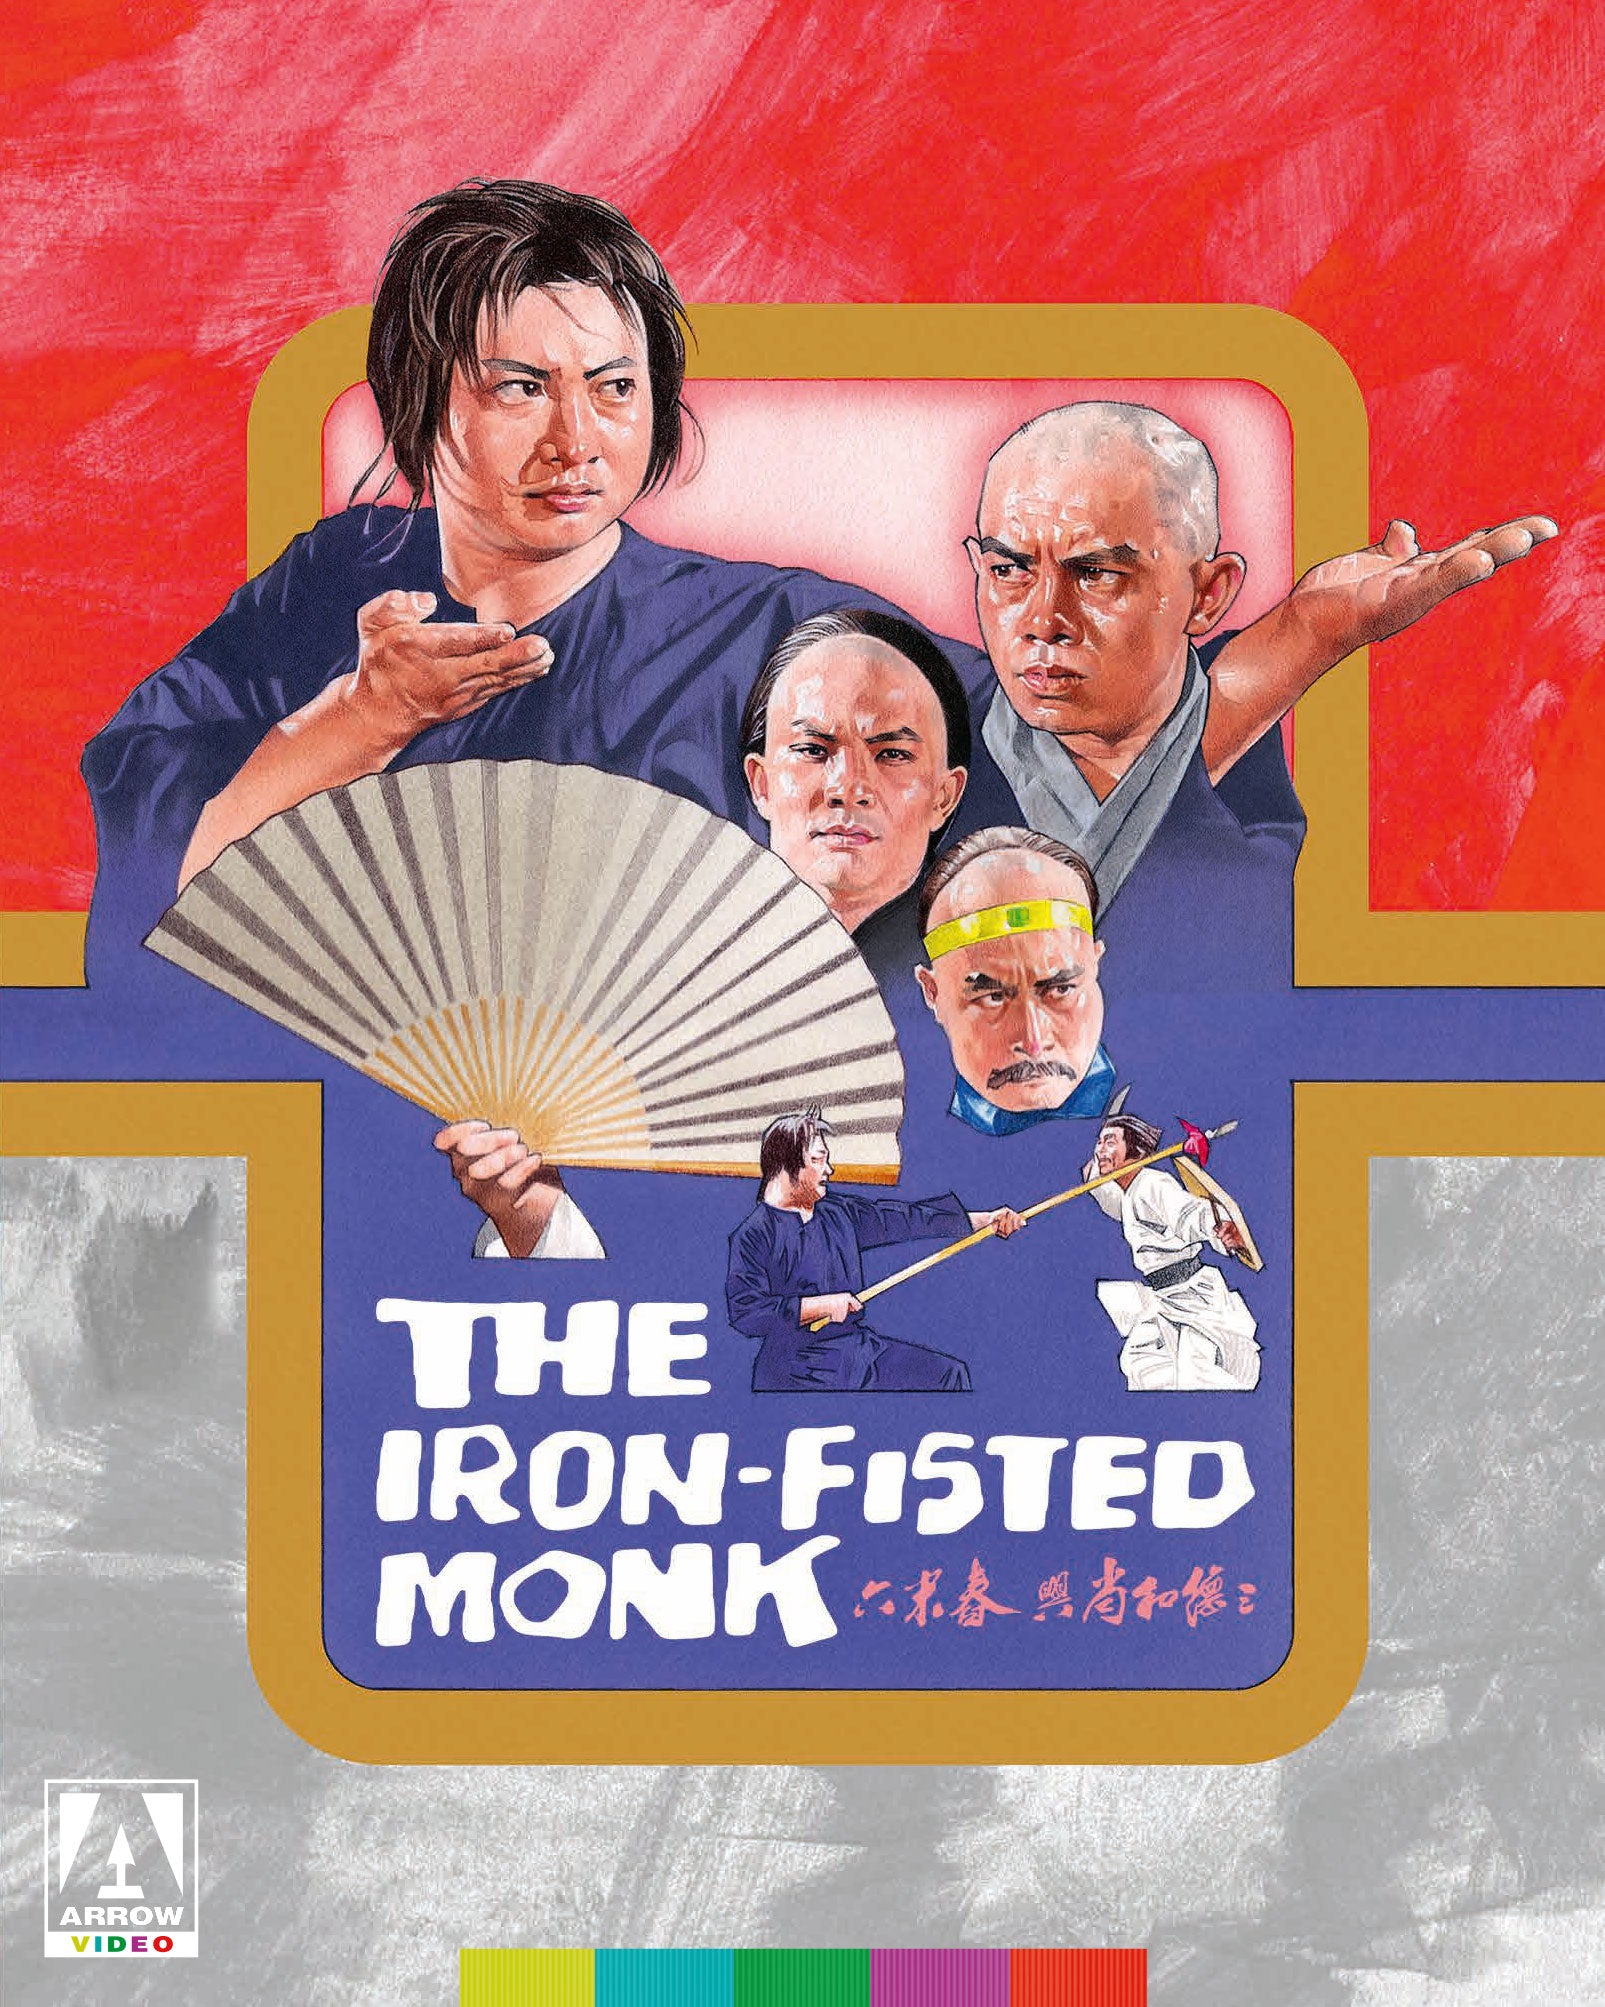 THE IRON FISTED MONK (LIMITED EDITION) BLU-RAY